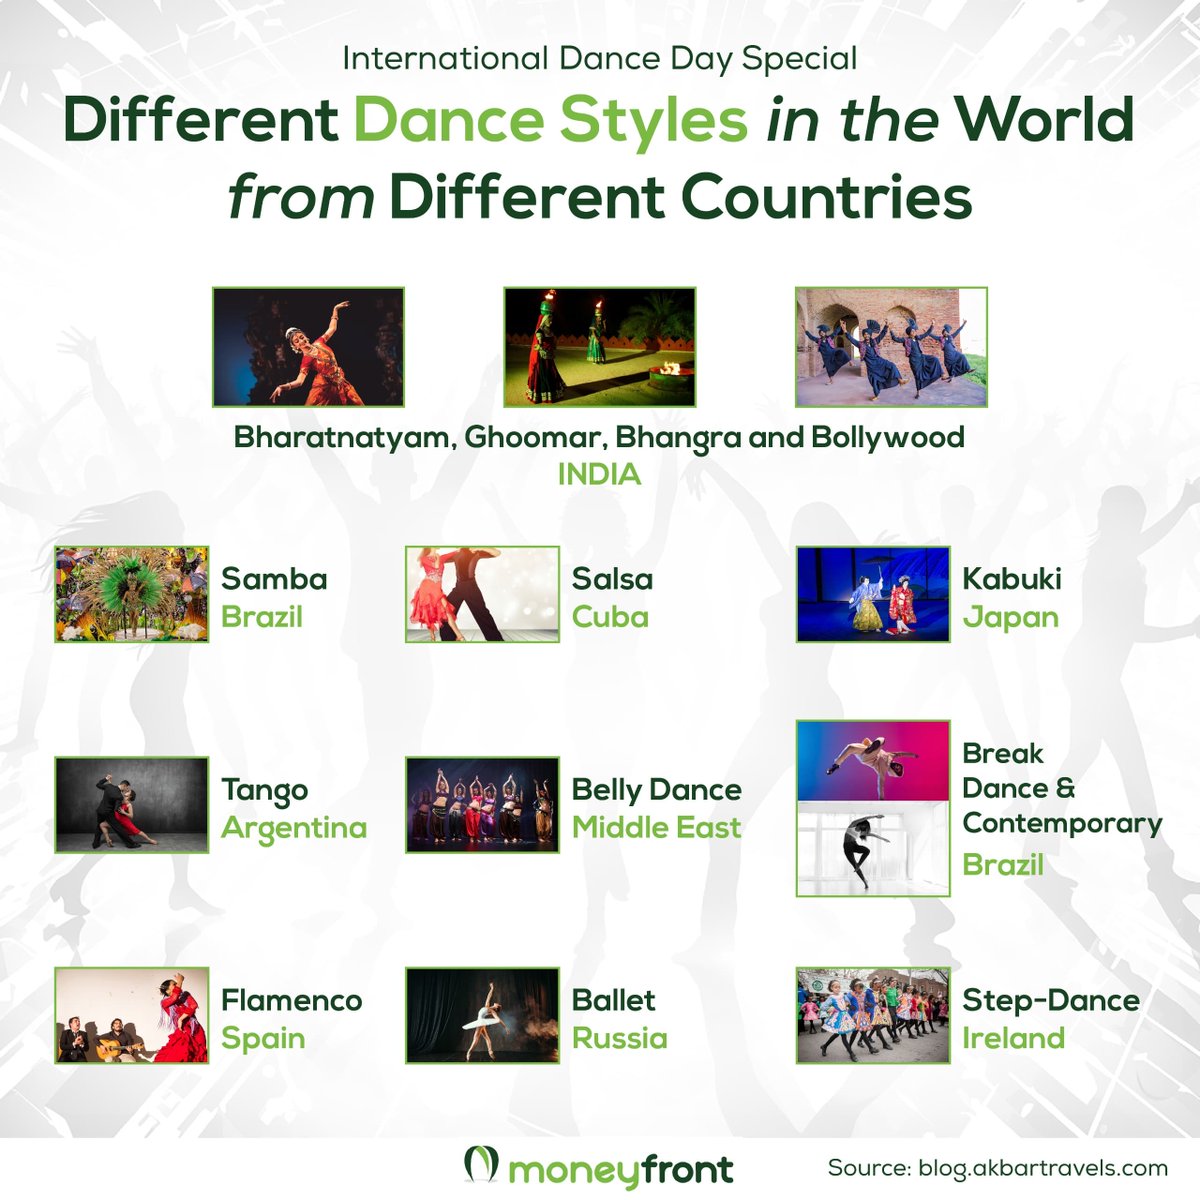 This International Dance Day, explore the beauty of movement worldwide, from exquisite ballet leaps to the rhythmic energy that unifies cultures.

#InternationalDanceDay #Dance #WorldDance #Culture #moveyourbody #EveryBodyCanDance #DanceMoves #DanceInspiration #DancingFeet